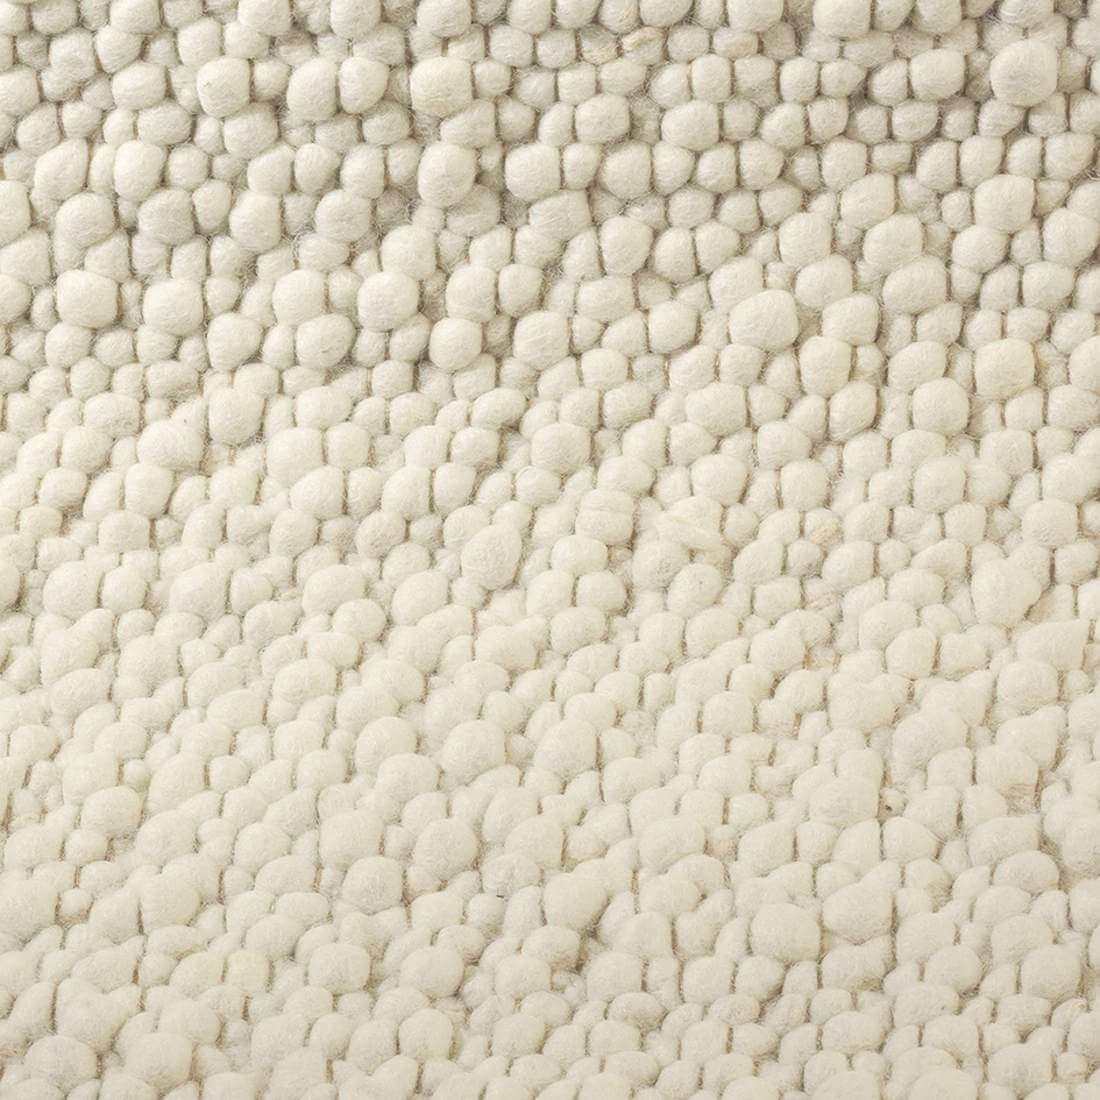 Stubble 29709 Rug by Brink & Campman